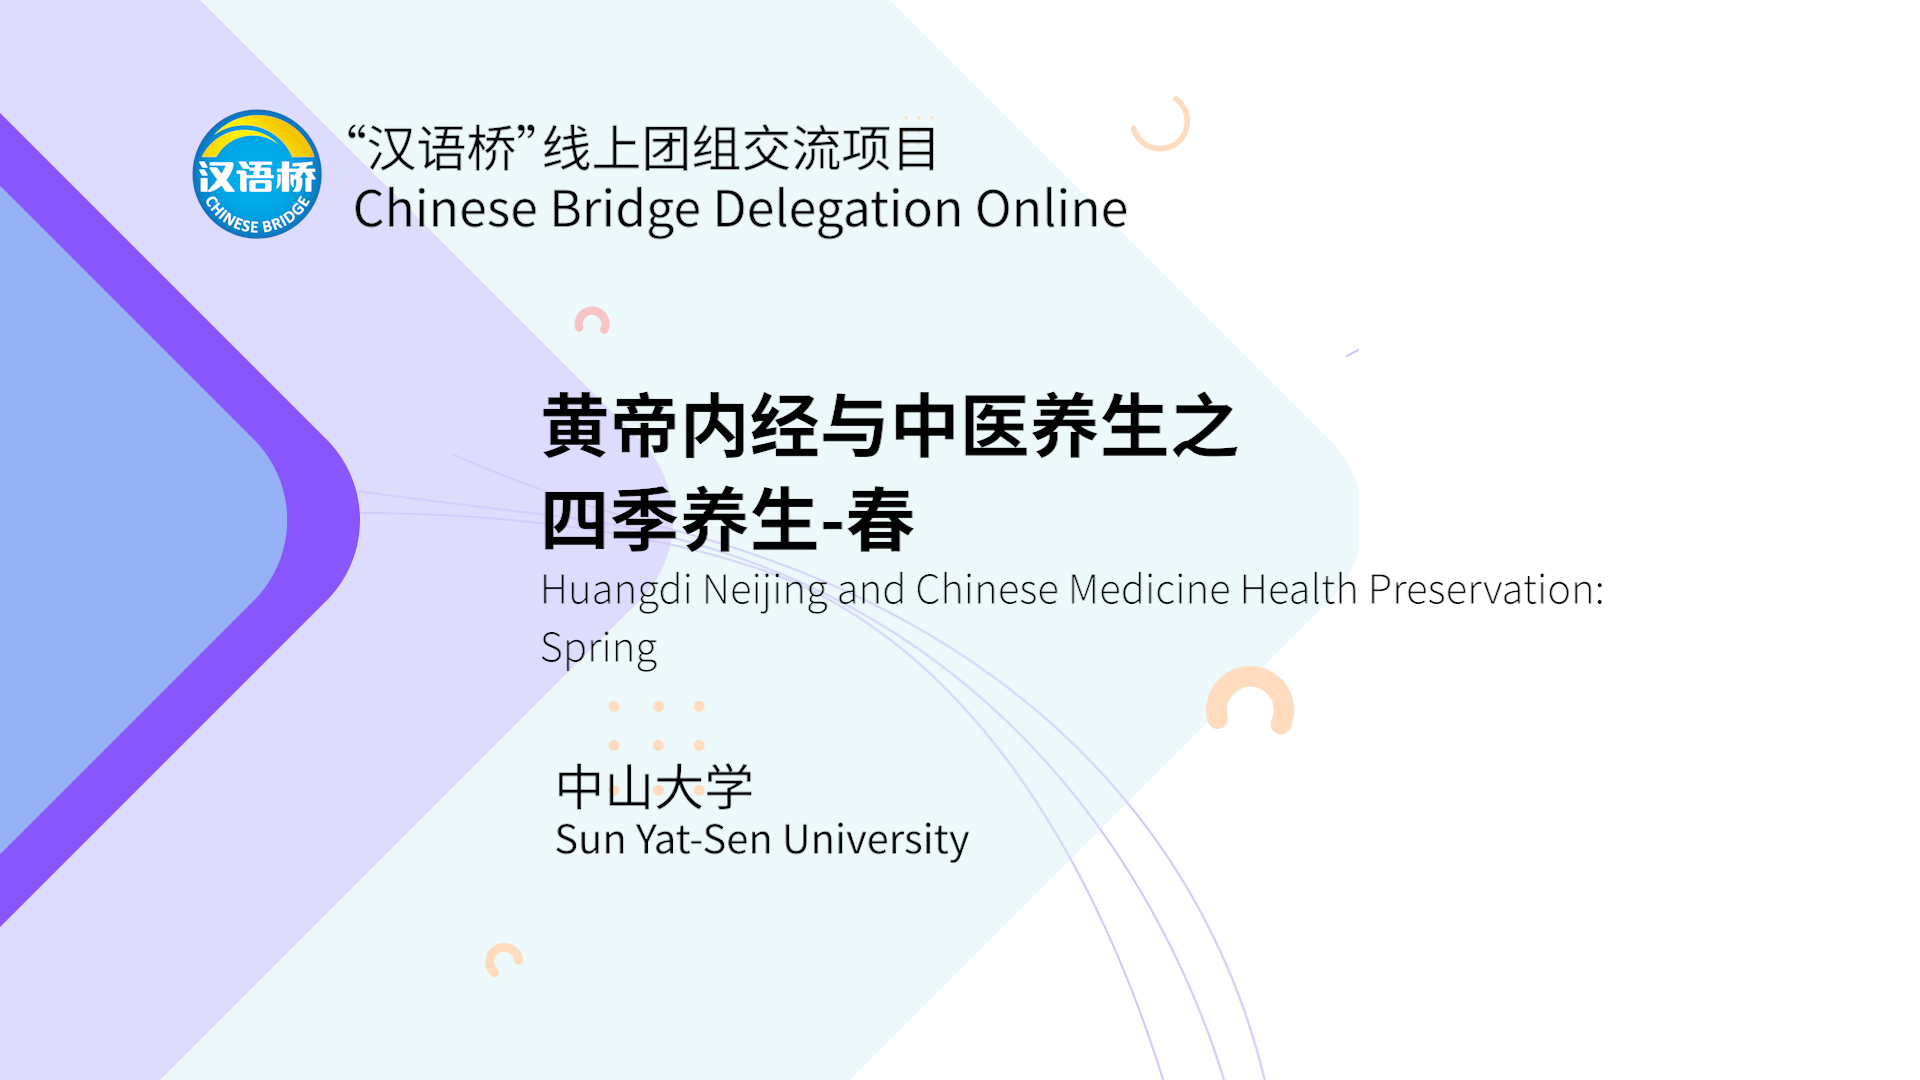 Huangdi Neijing and Chinese Medicine Health Preservation-Spring